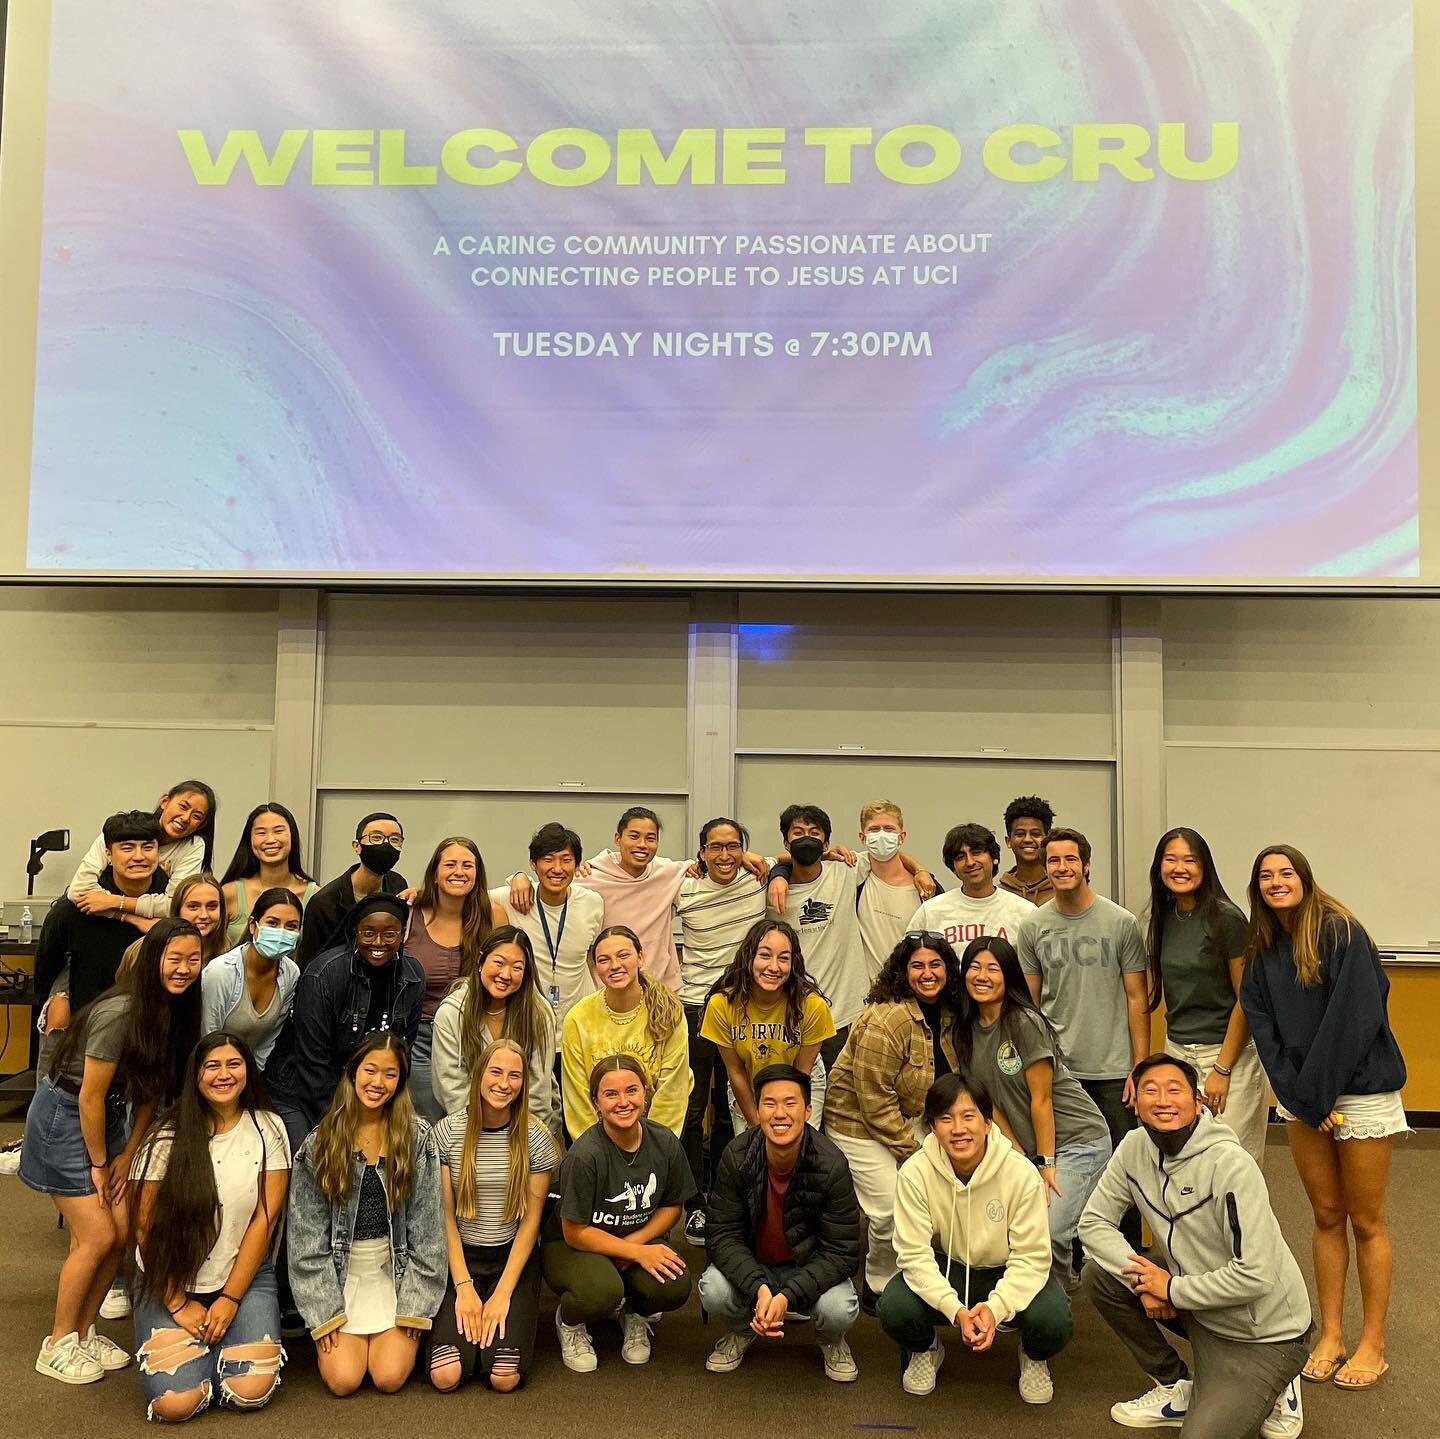 That&rsquo;s a wrap on the 21-22 school year! Thanks to everyone who came out &amp; became a part of our &ldquo;CRUmmunity&rdquo; this year :) We&rsquo;ve loved spending time in fellowship getting to know one another, growing in our faith together, e